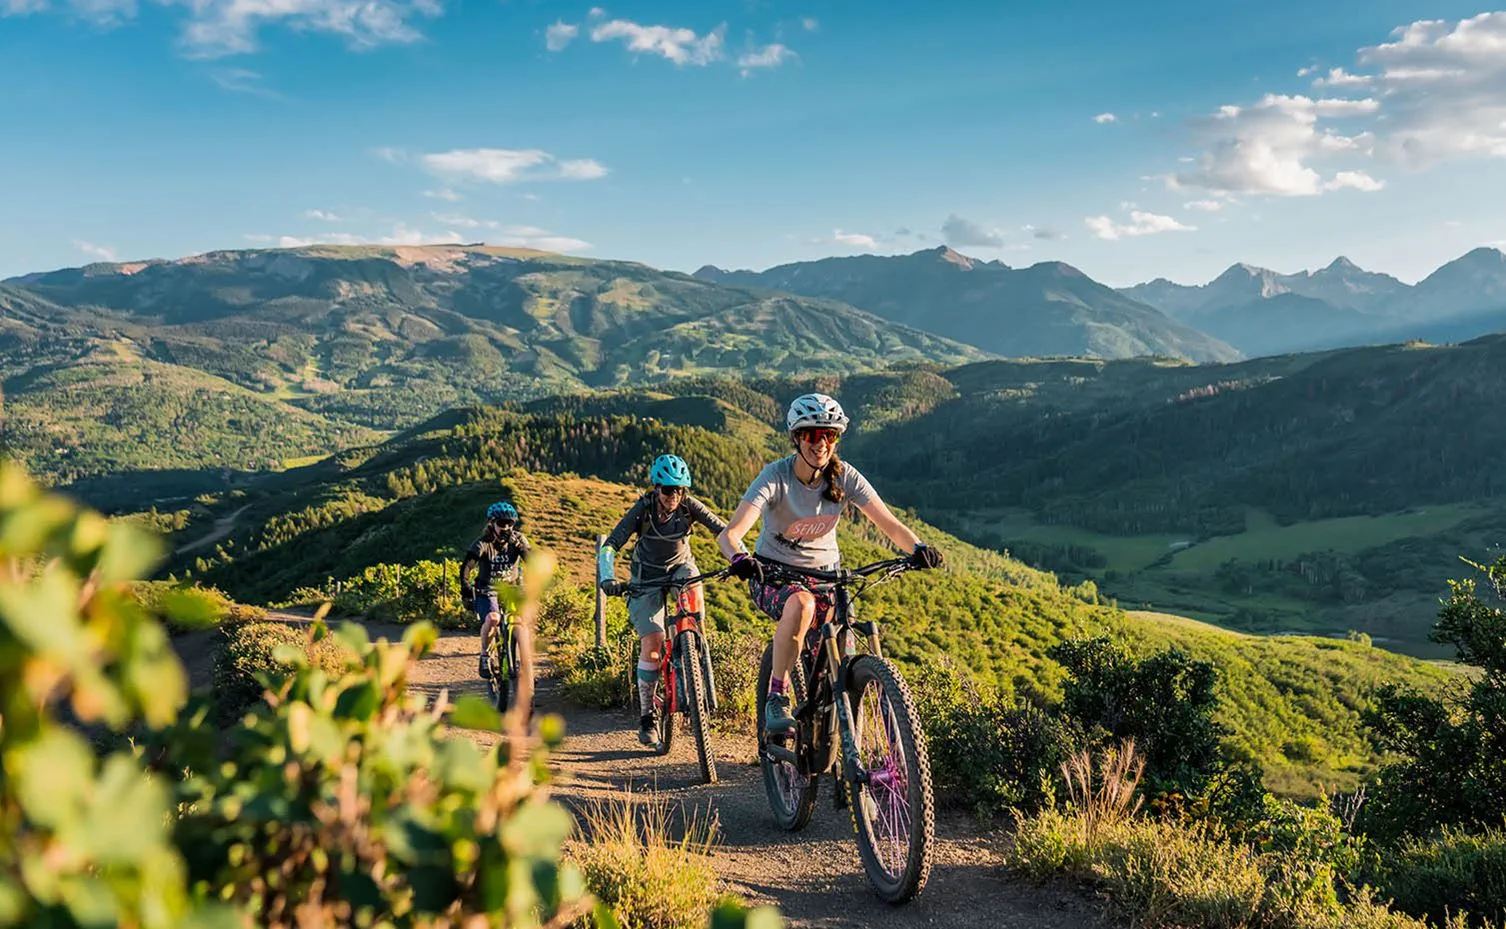 Family-Friendly Fun: Making Memories with Rental Bikes for All Ages